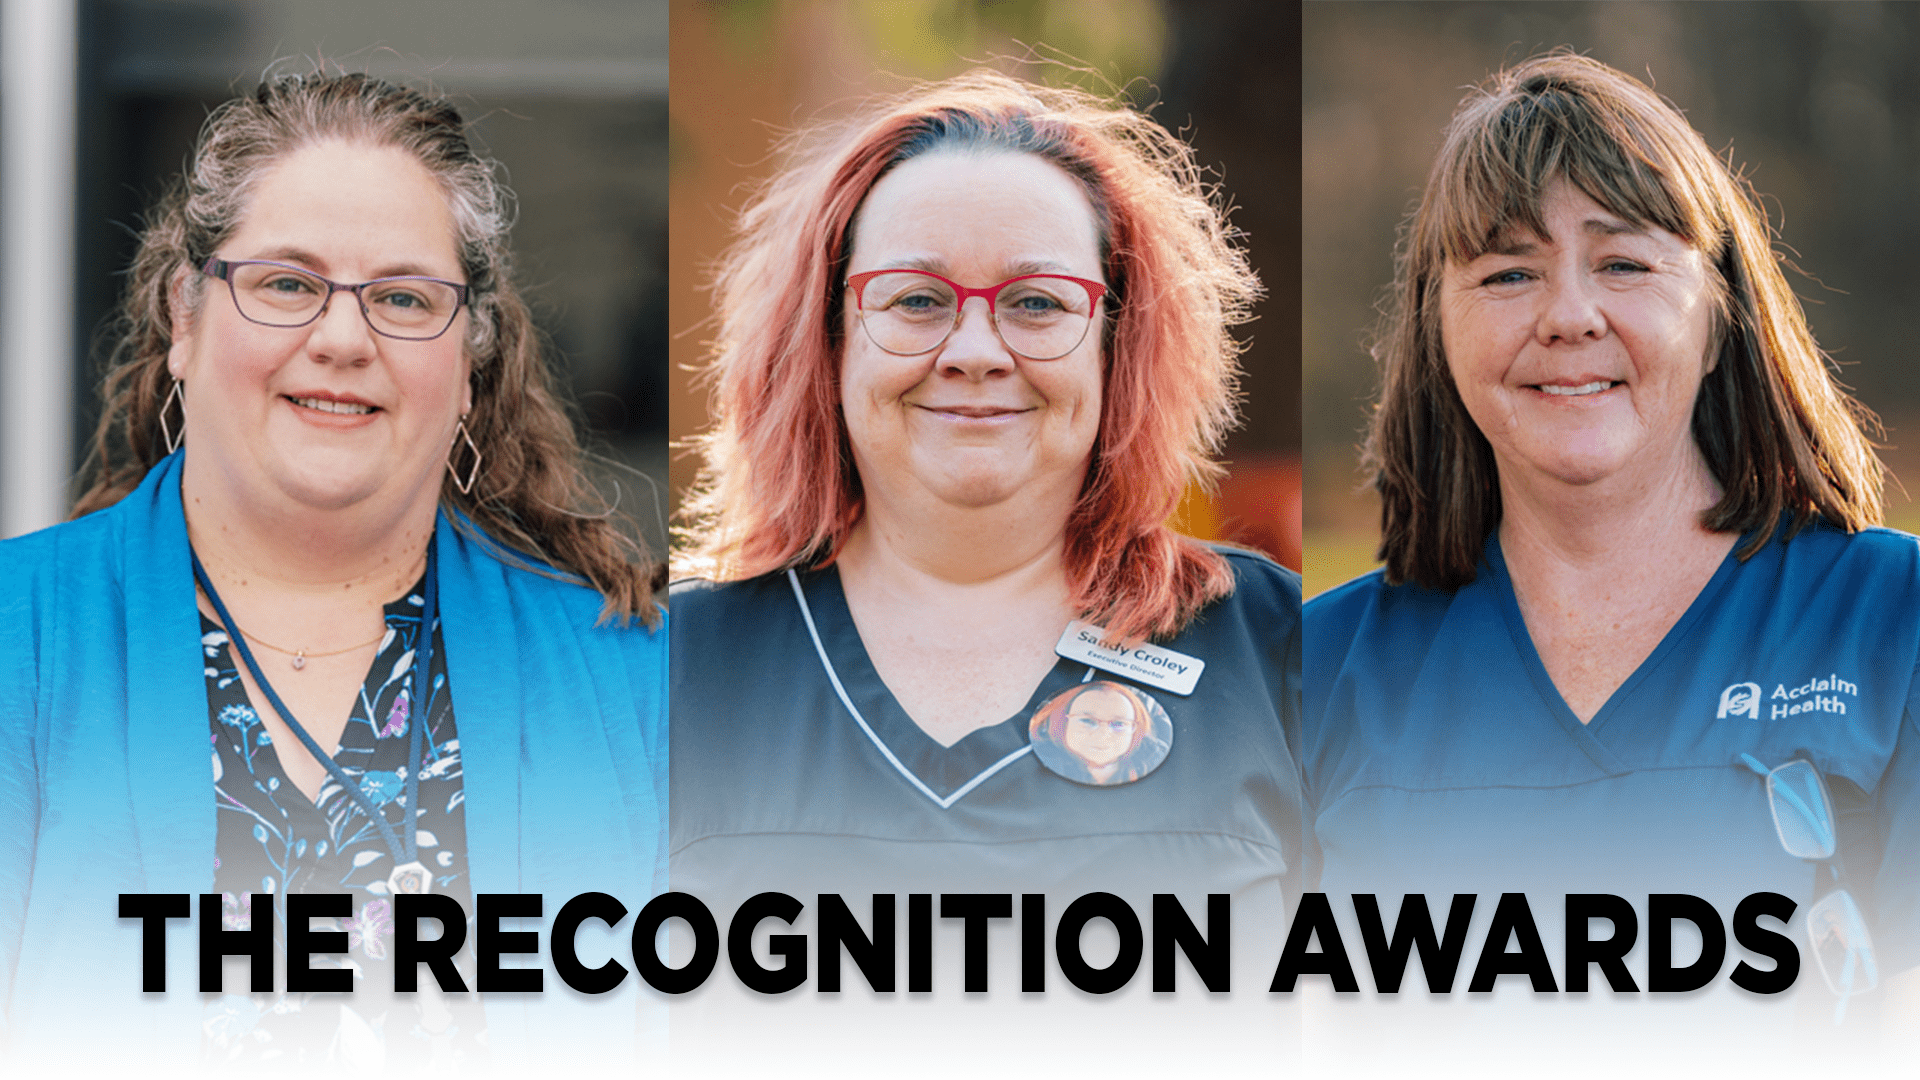 Collage image showing award recipients; Michelle Barclay, Sandy Croley, Sherry Fjell